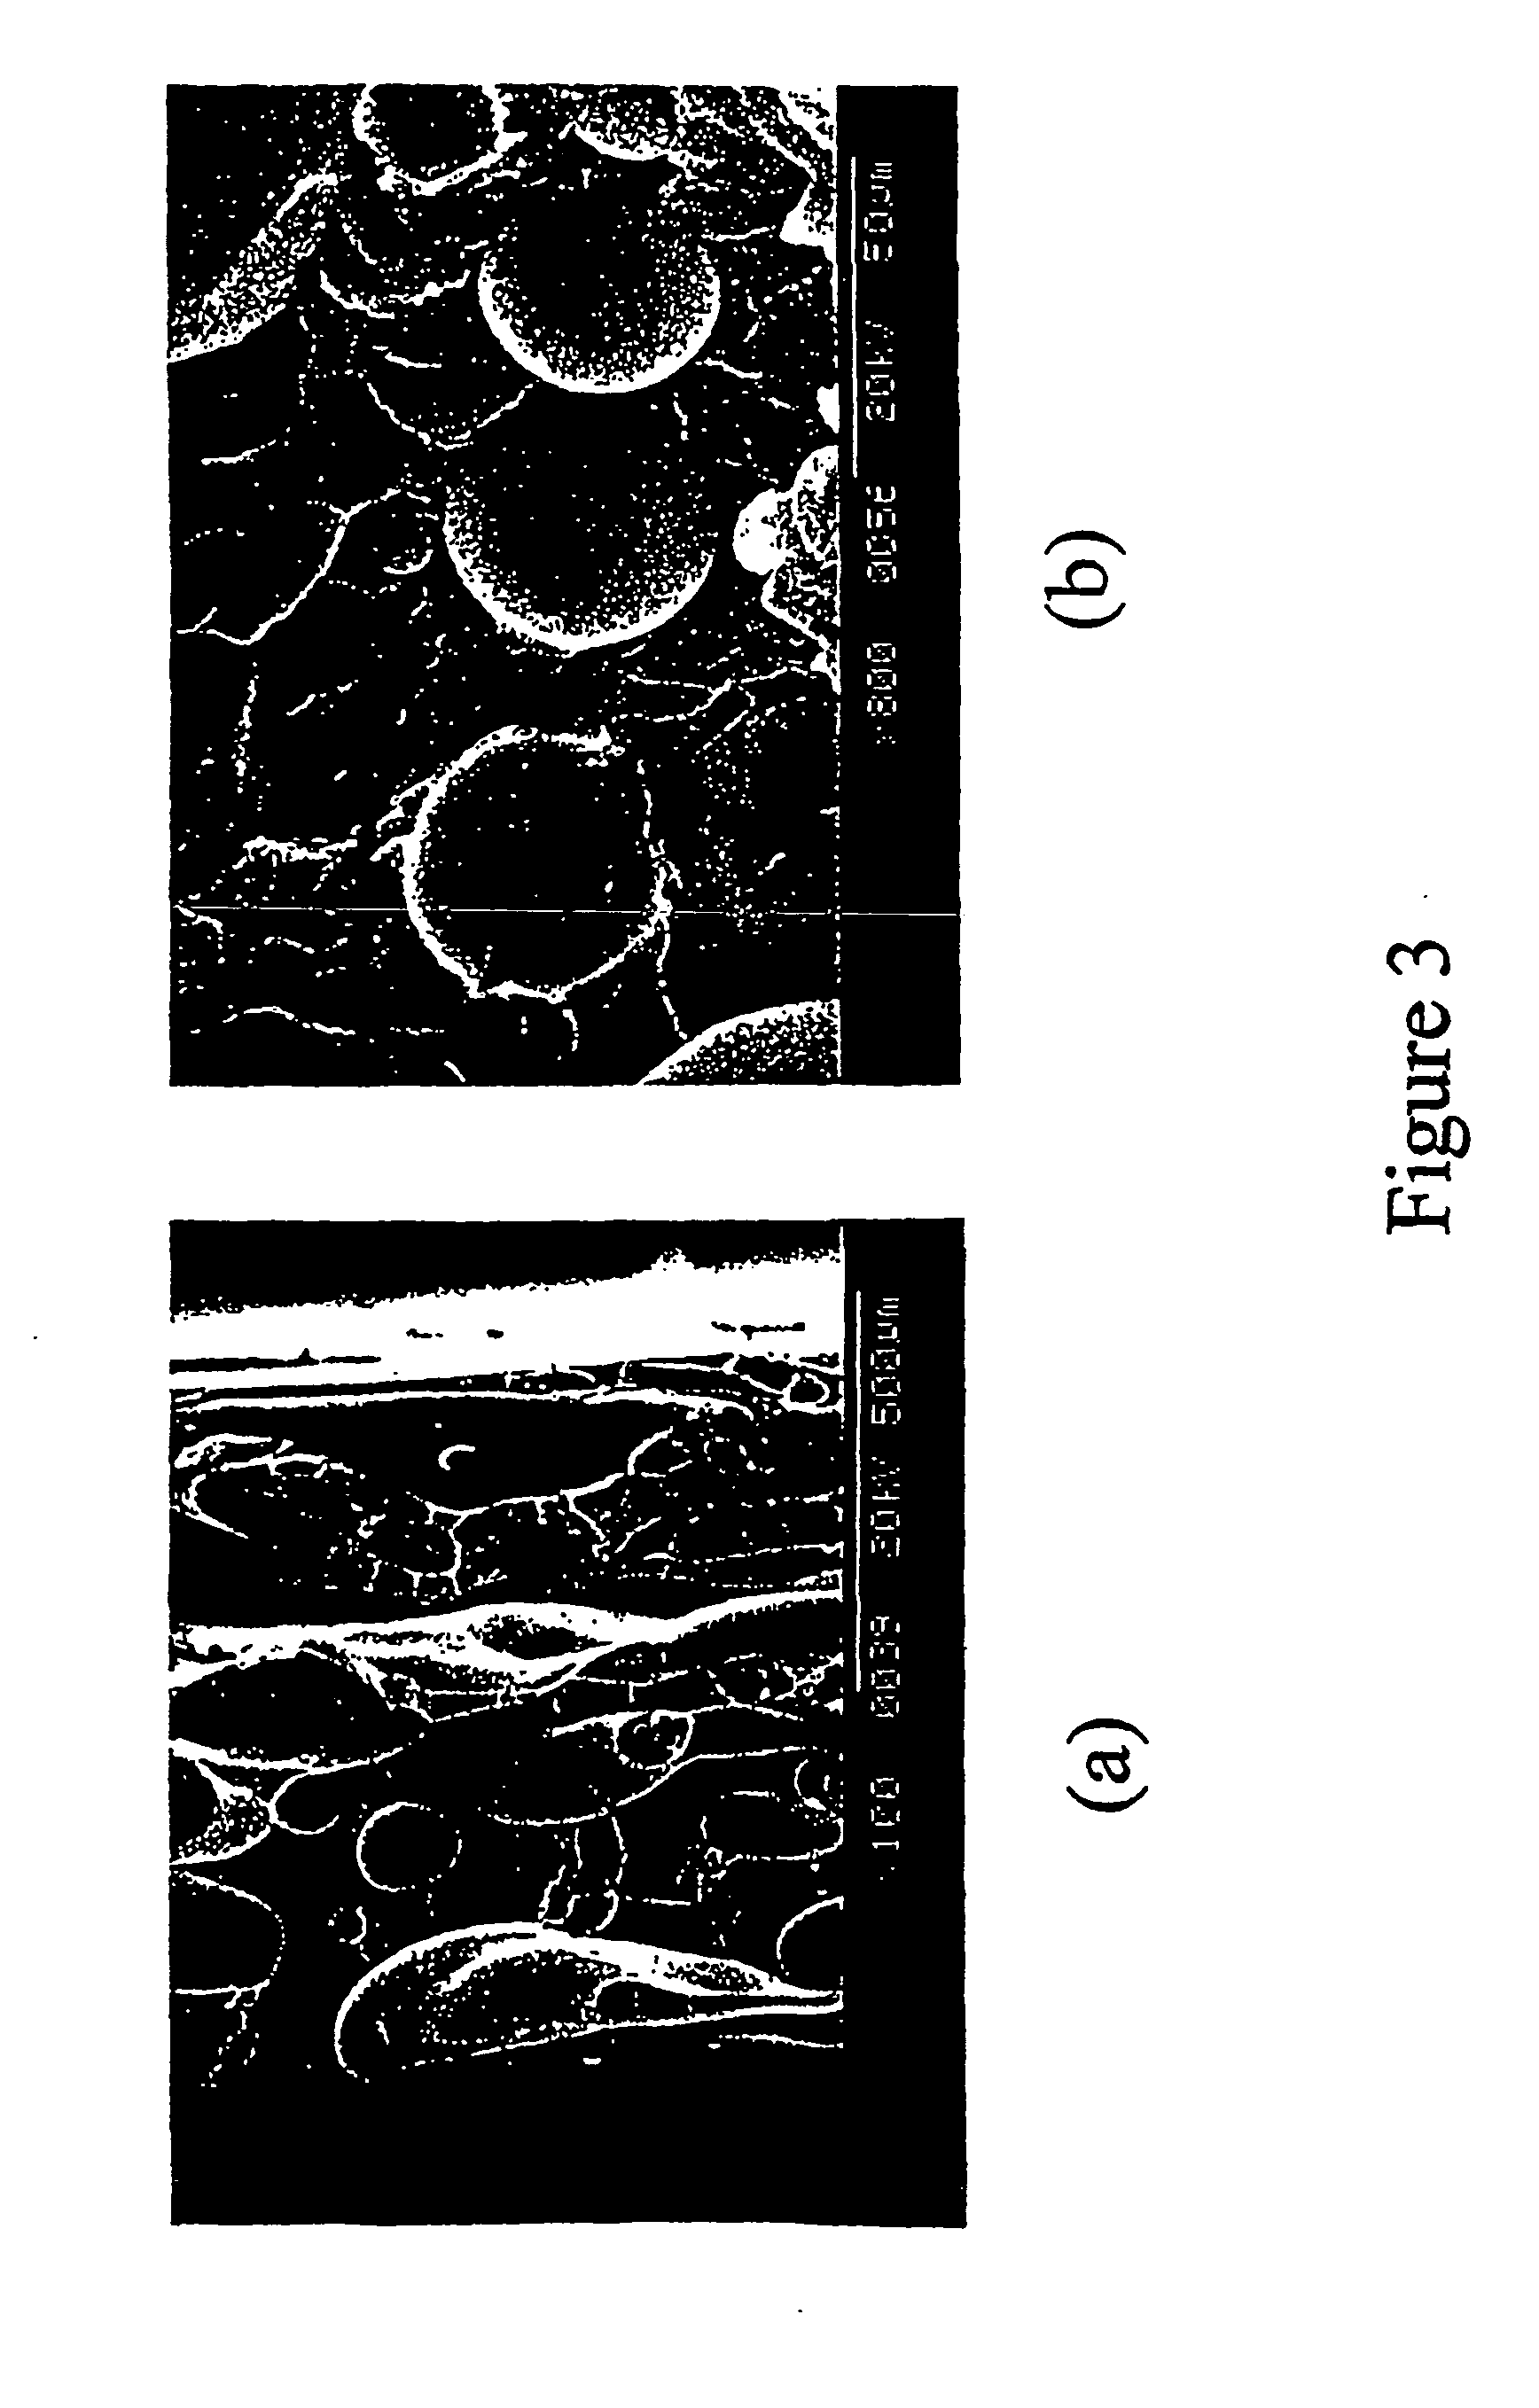 Methods for producing micro and nano-scale dispersed-phase morphologies in polymeric systems comprising at least two